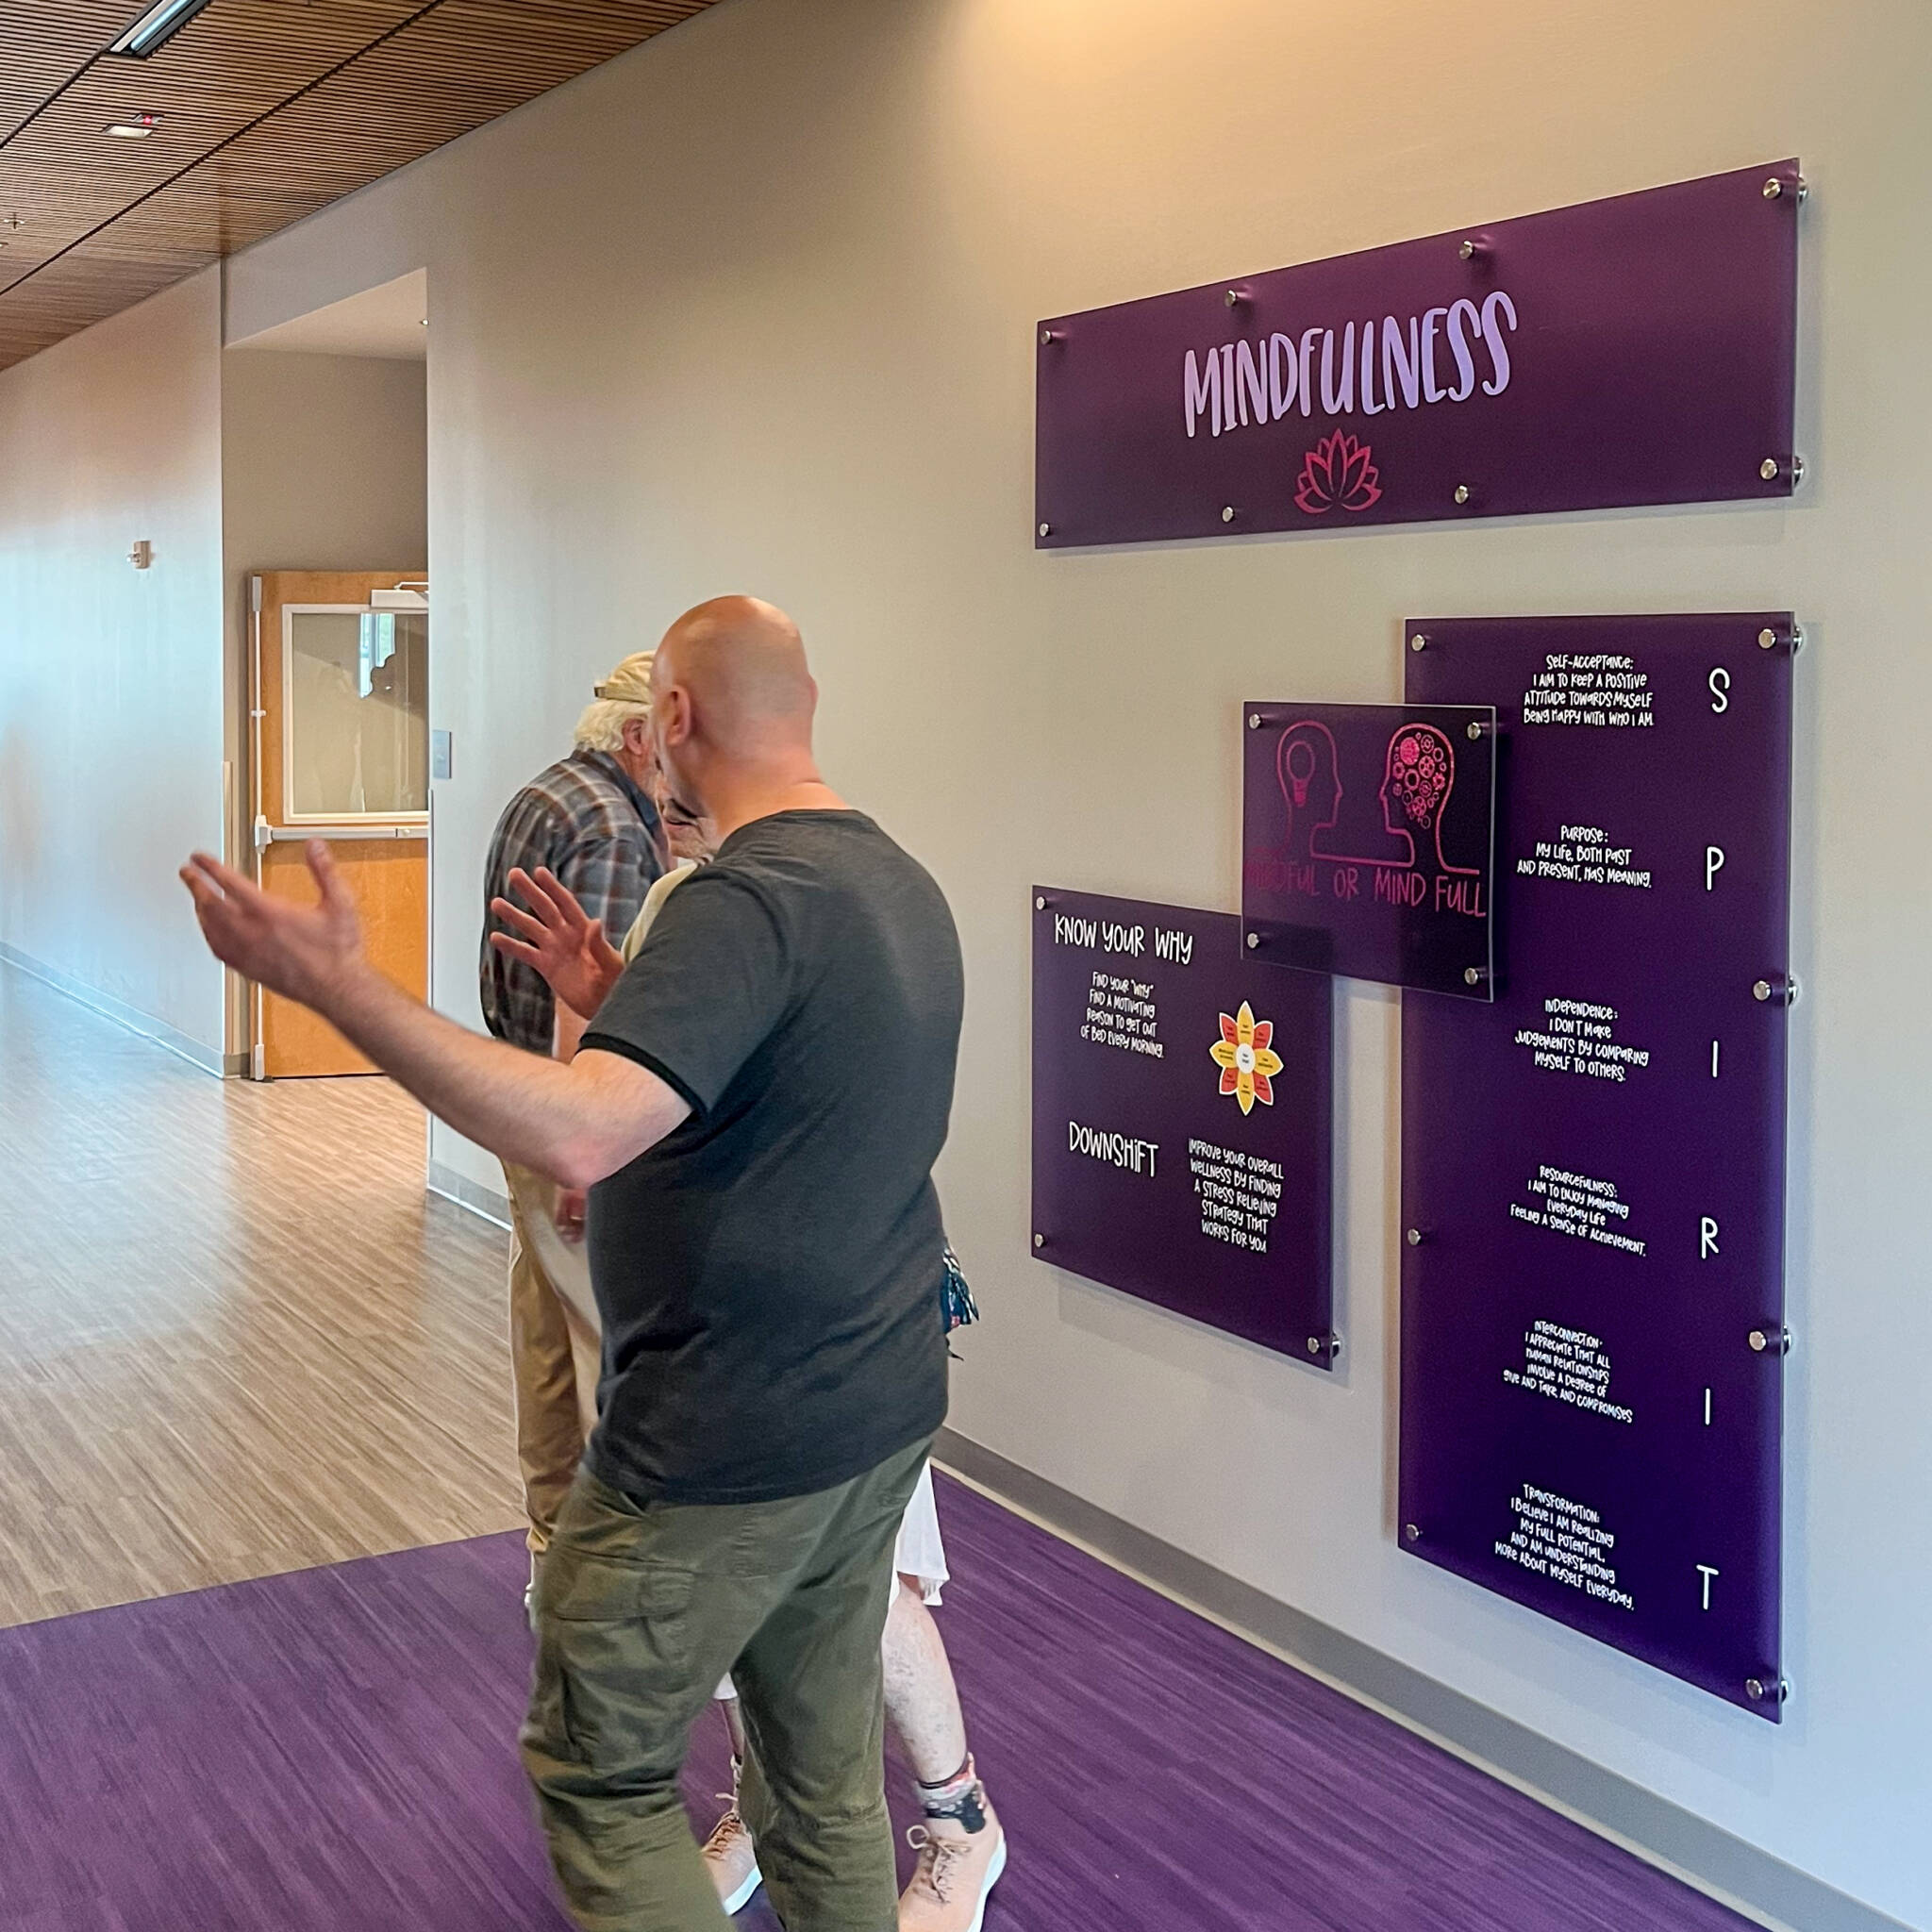 Employee showing visitors signage explaining the importance of mindfulness at the wellness center.